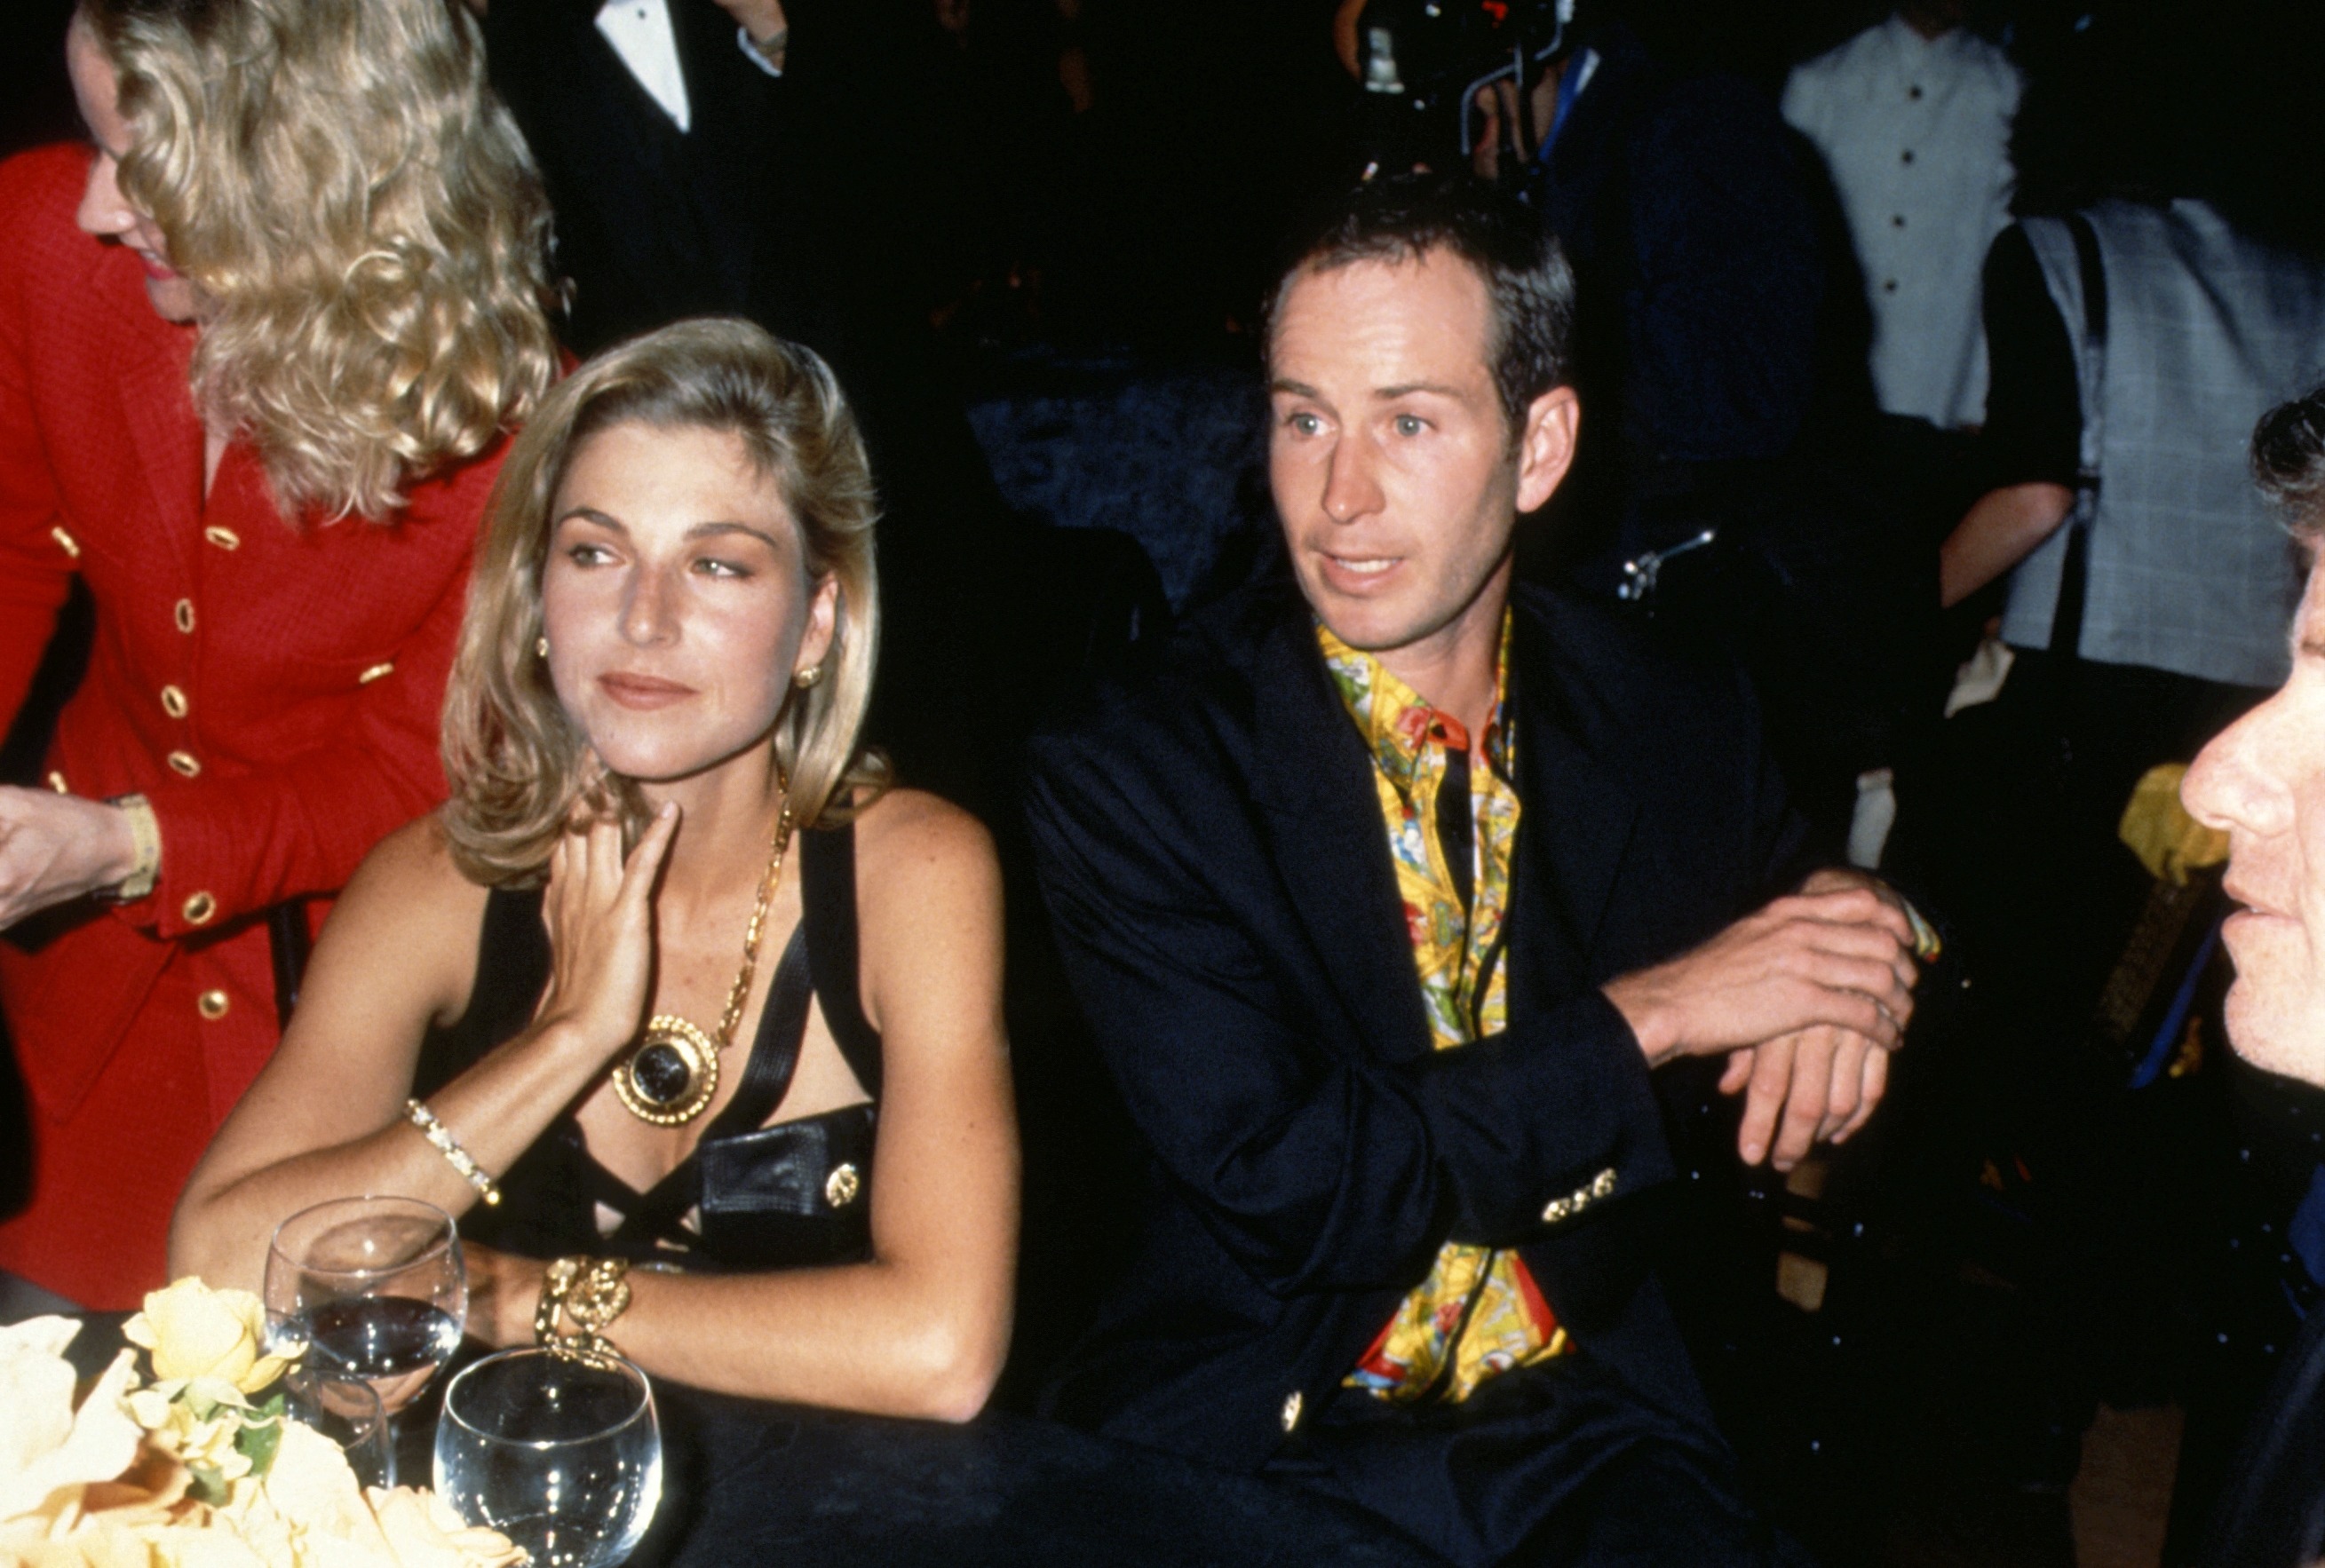 NEW YORK - CIRCA 1992: John McEnroe and Tatum O'Neal circa 1992 in New York City. (Photo by Images Press/Getty Images)